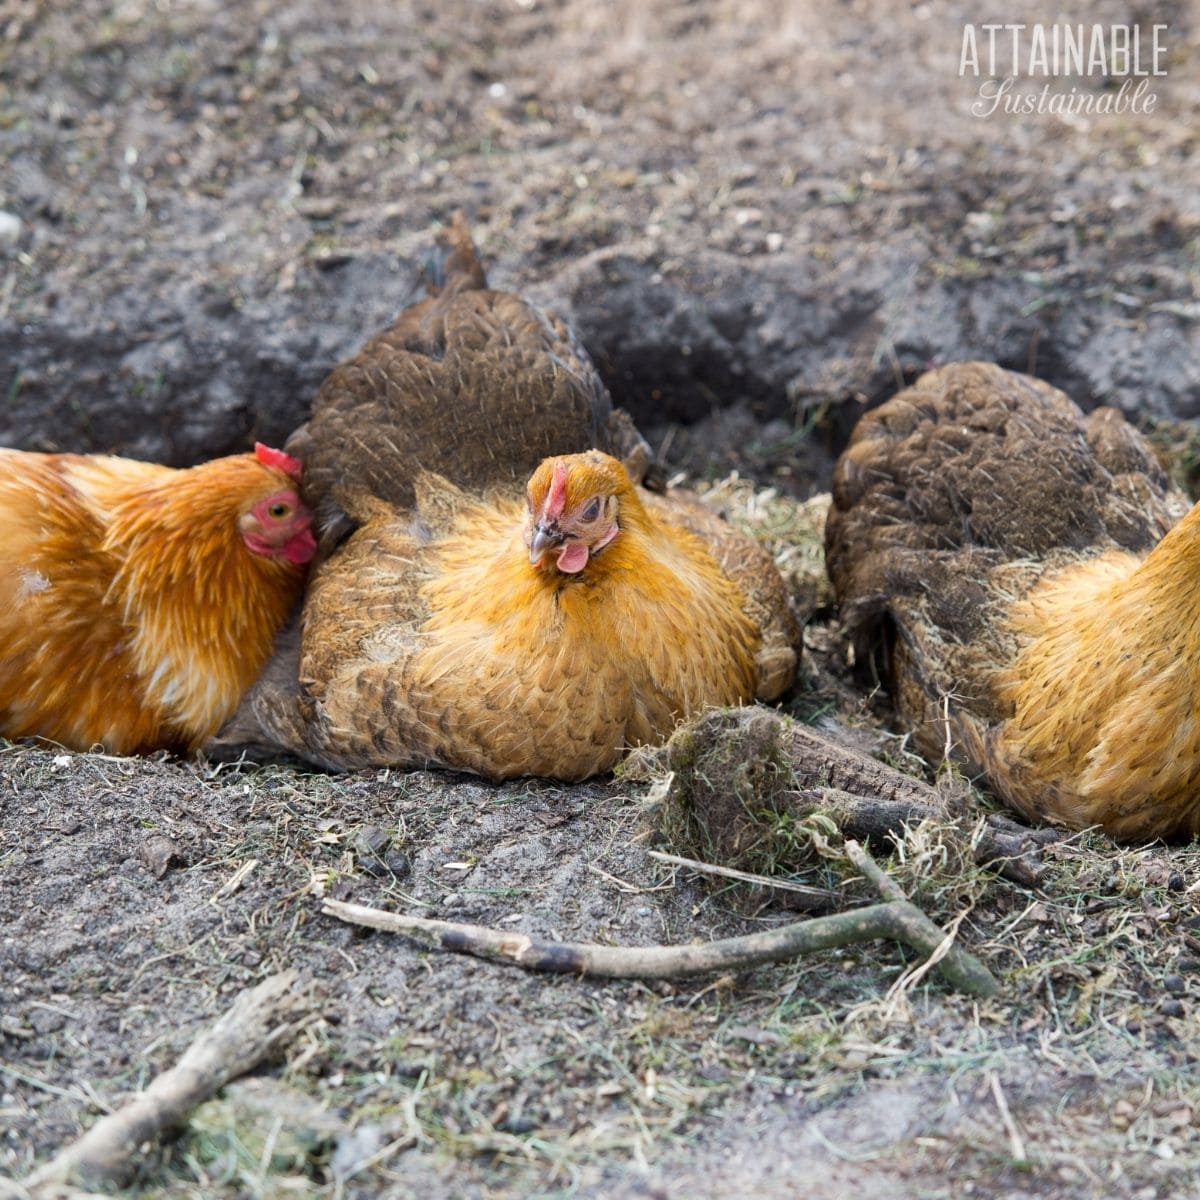 3 chickens dust bathing.